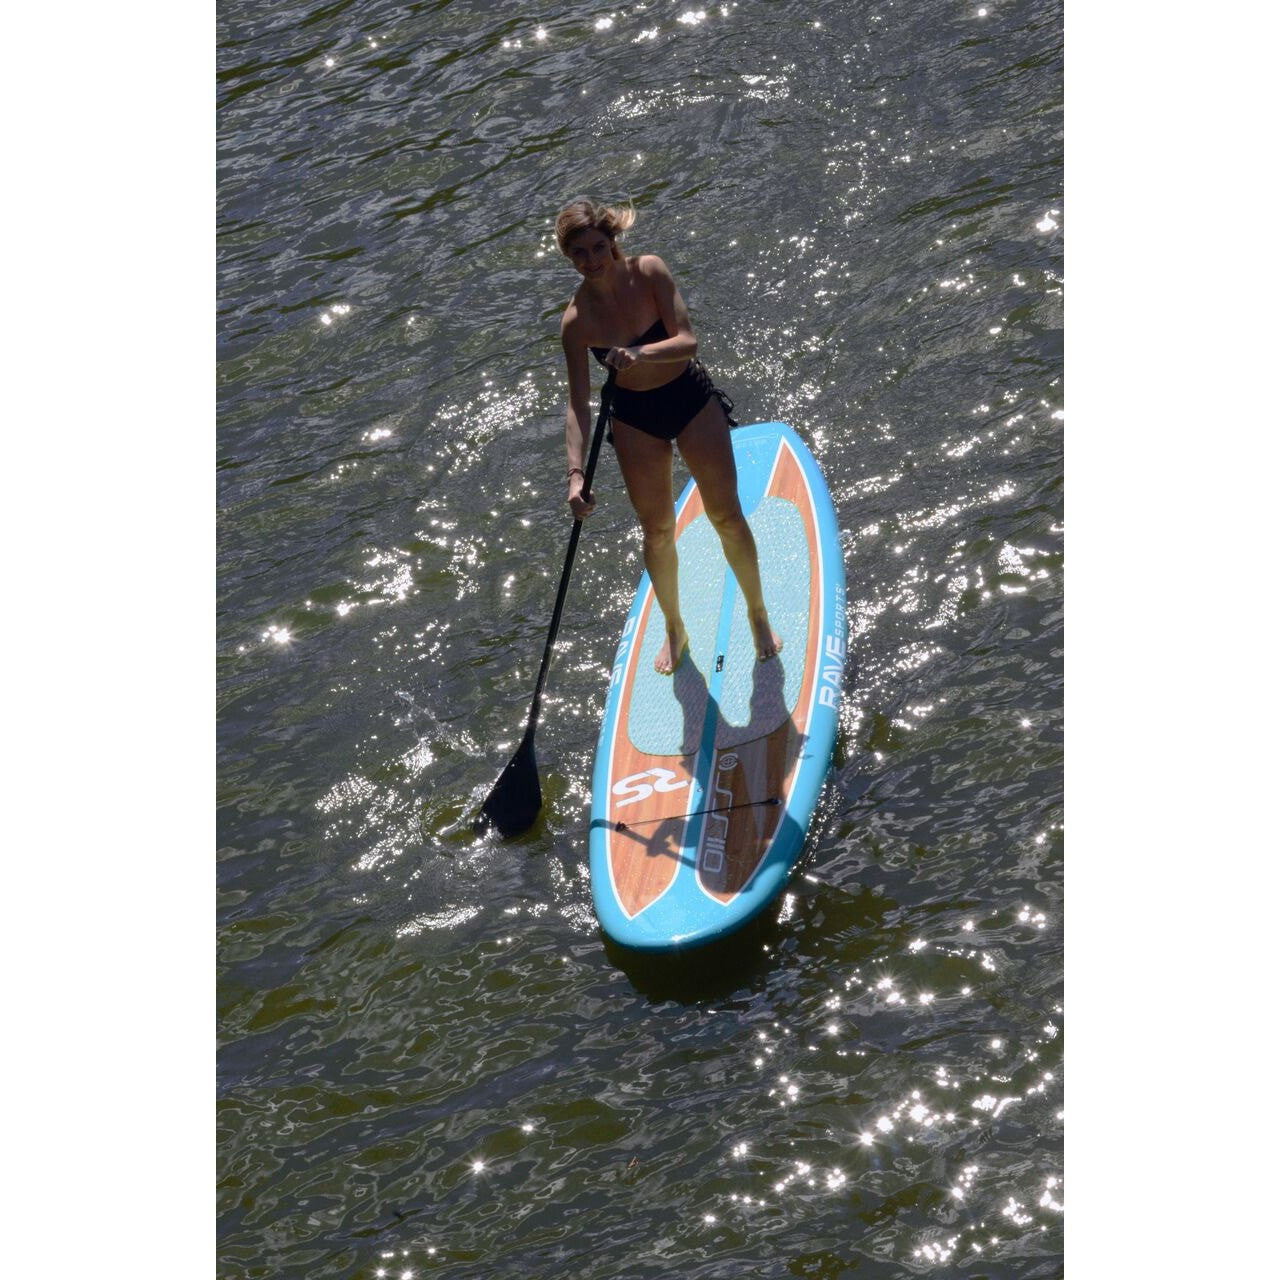 Rave Sports Kayak Creek Stand - Paddle 02728 Shoreline Series Up SUP SS110 - Board